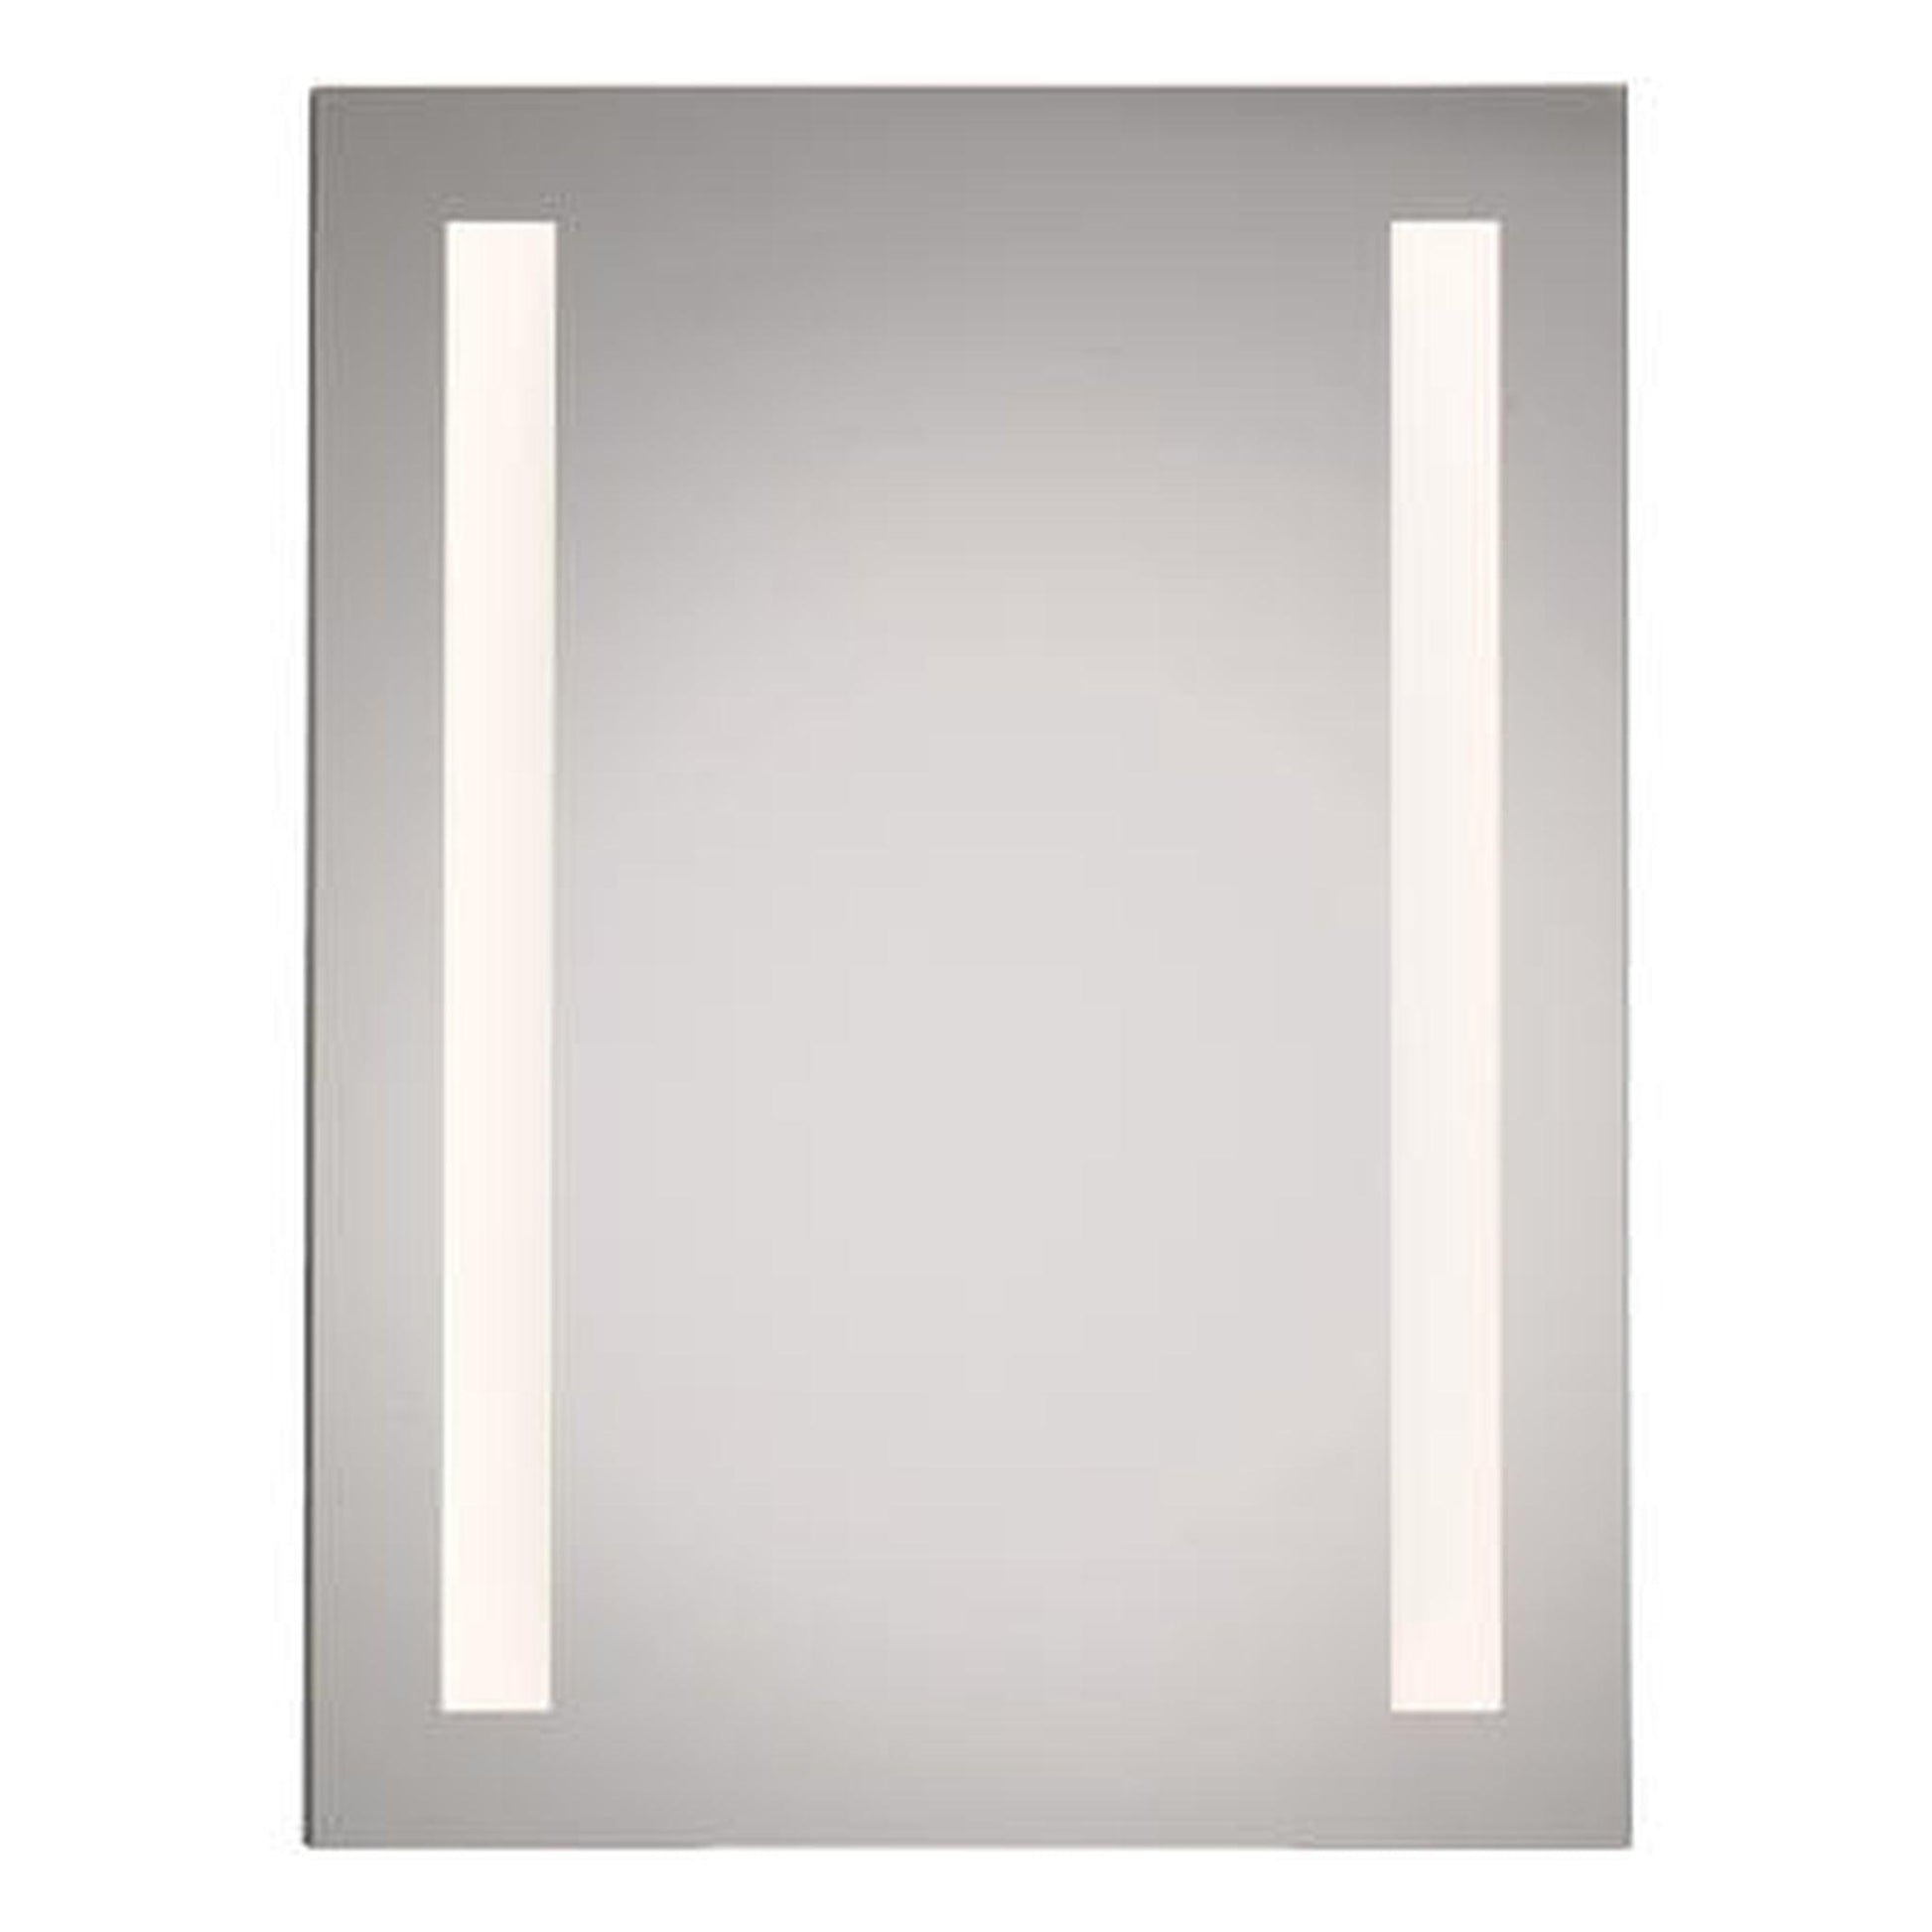 Afina Illume 24" x 36" Recessed Right Hinged Single Door Backlit LED Medicine Cabinet With Inside Electric, Nightlite and Polished Edge Mirror